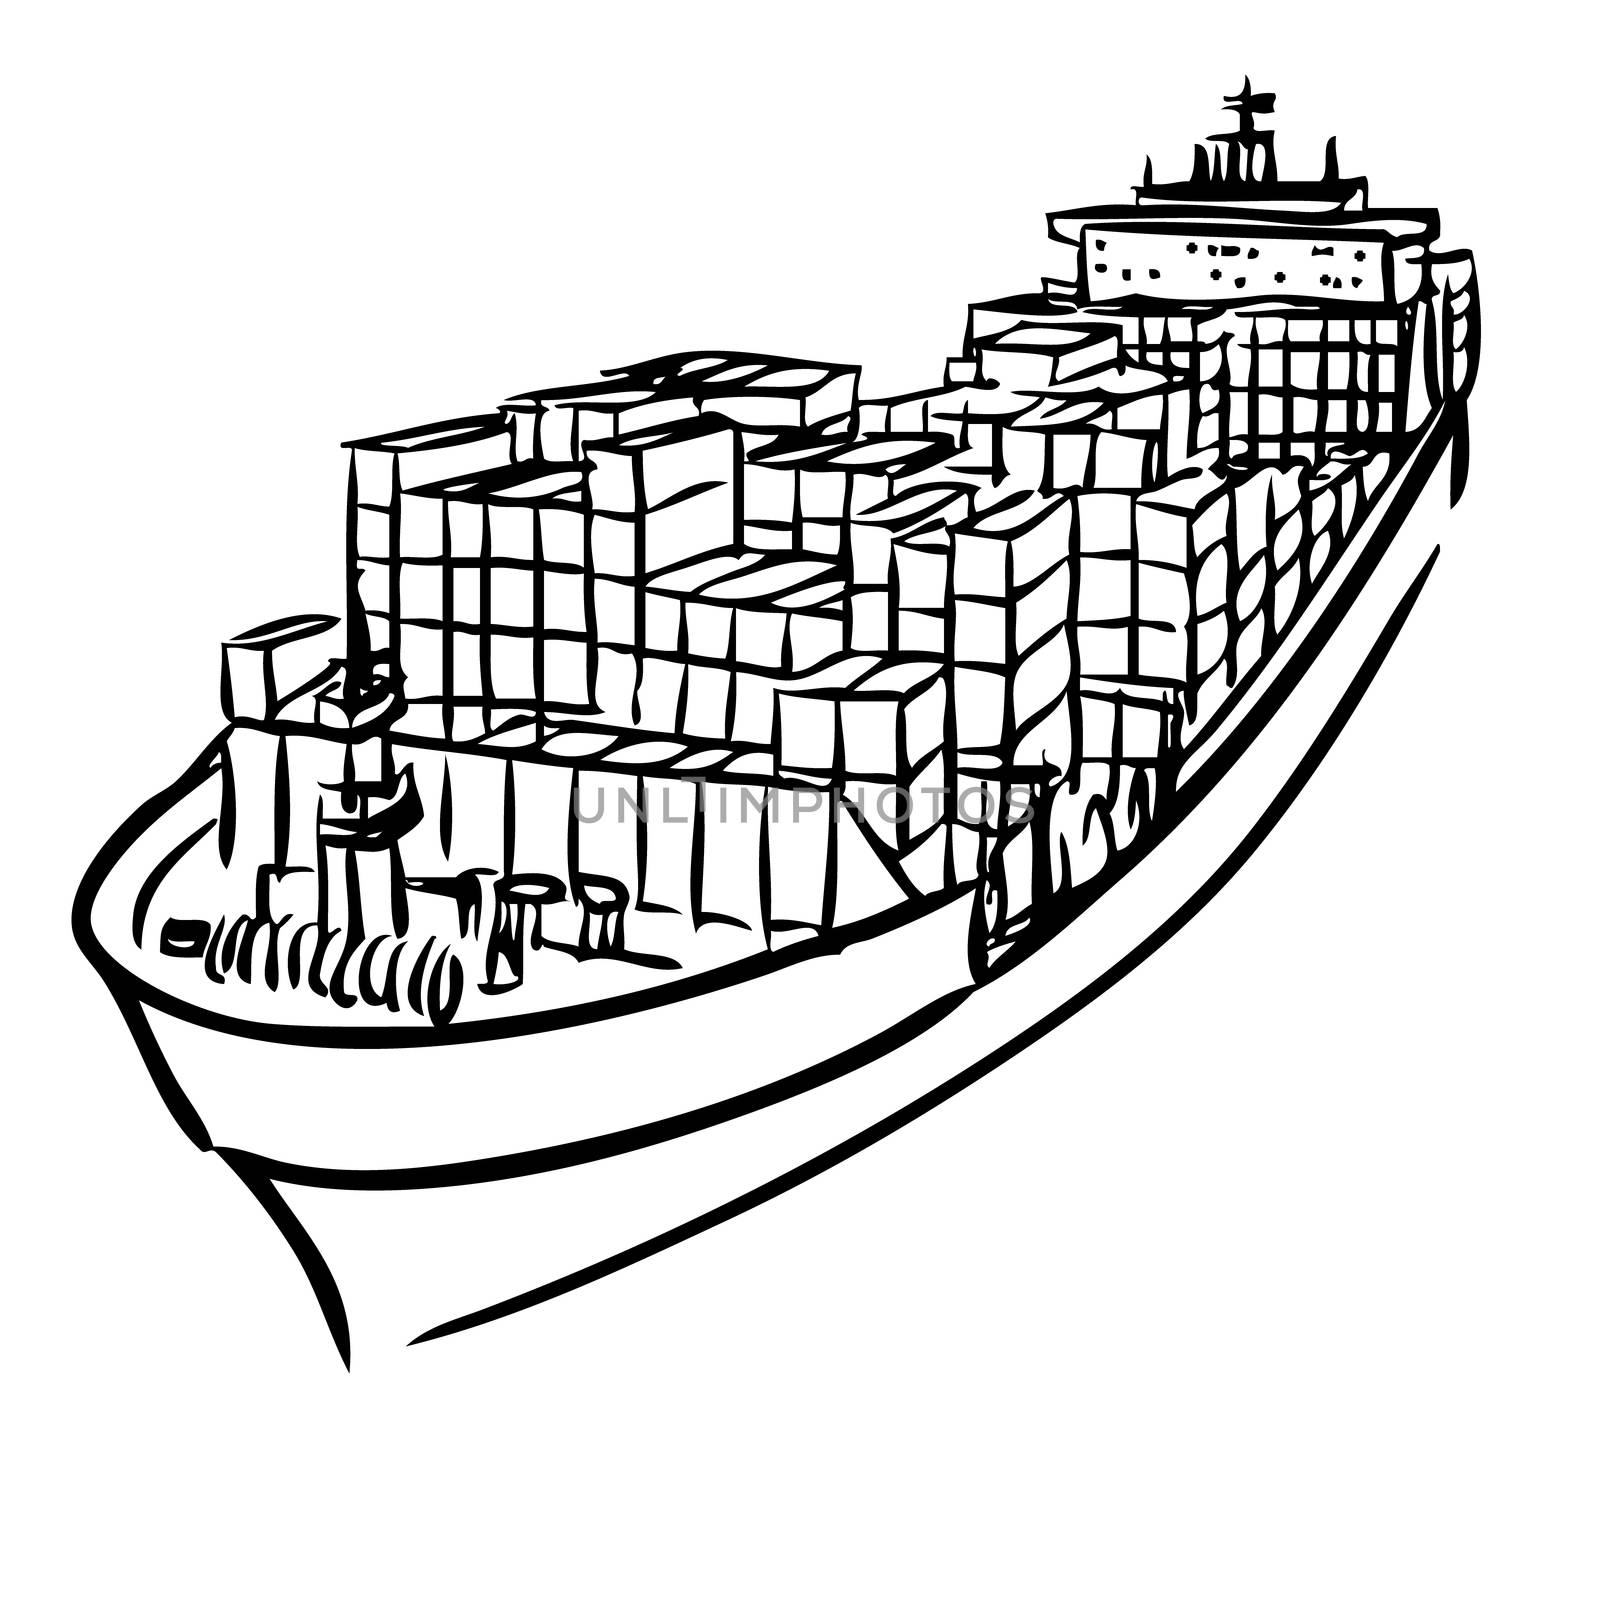 freehand sketch illustration of Cargo ship with containers icon, doodle hand drawn